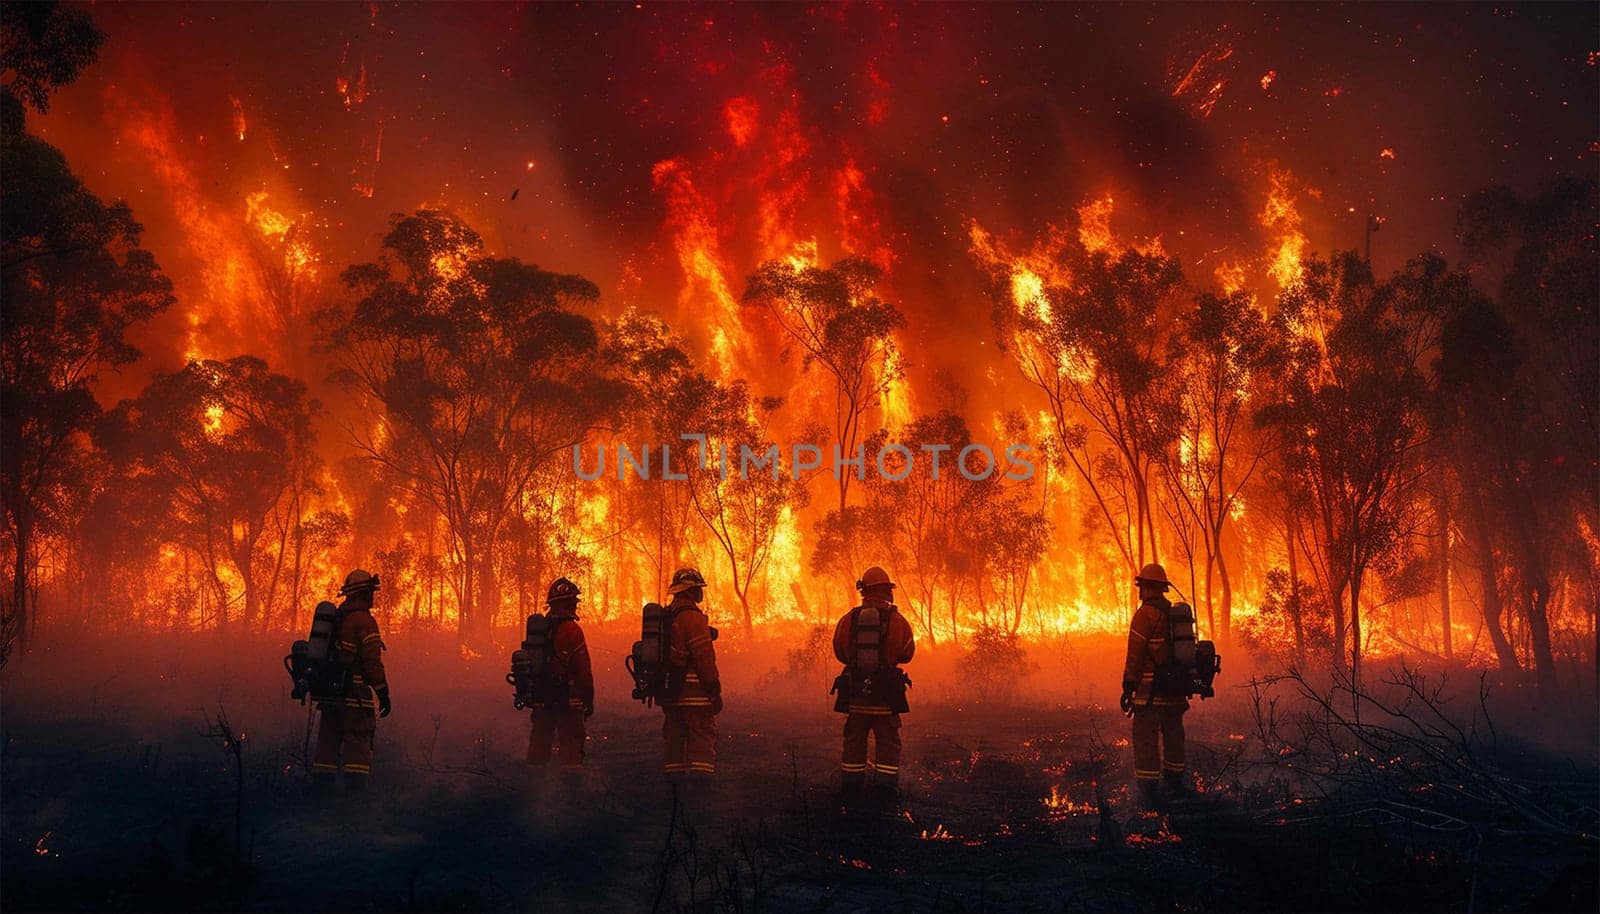 Experienced Firefighter Extinguishing a Wildland Fire Deep in the Woods. Professional in Safety Uniform and Helmet Spraying Water to Fight Large Flames Spreading Through Trees. Forest fire copy space